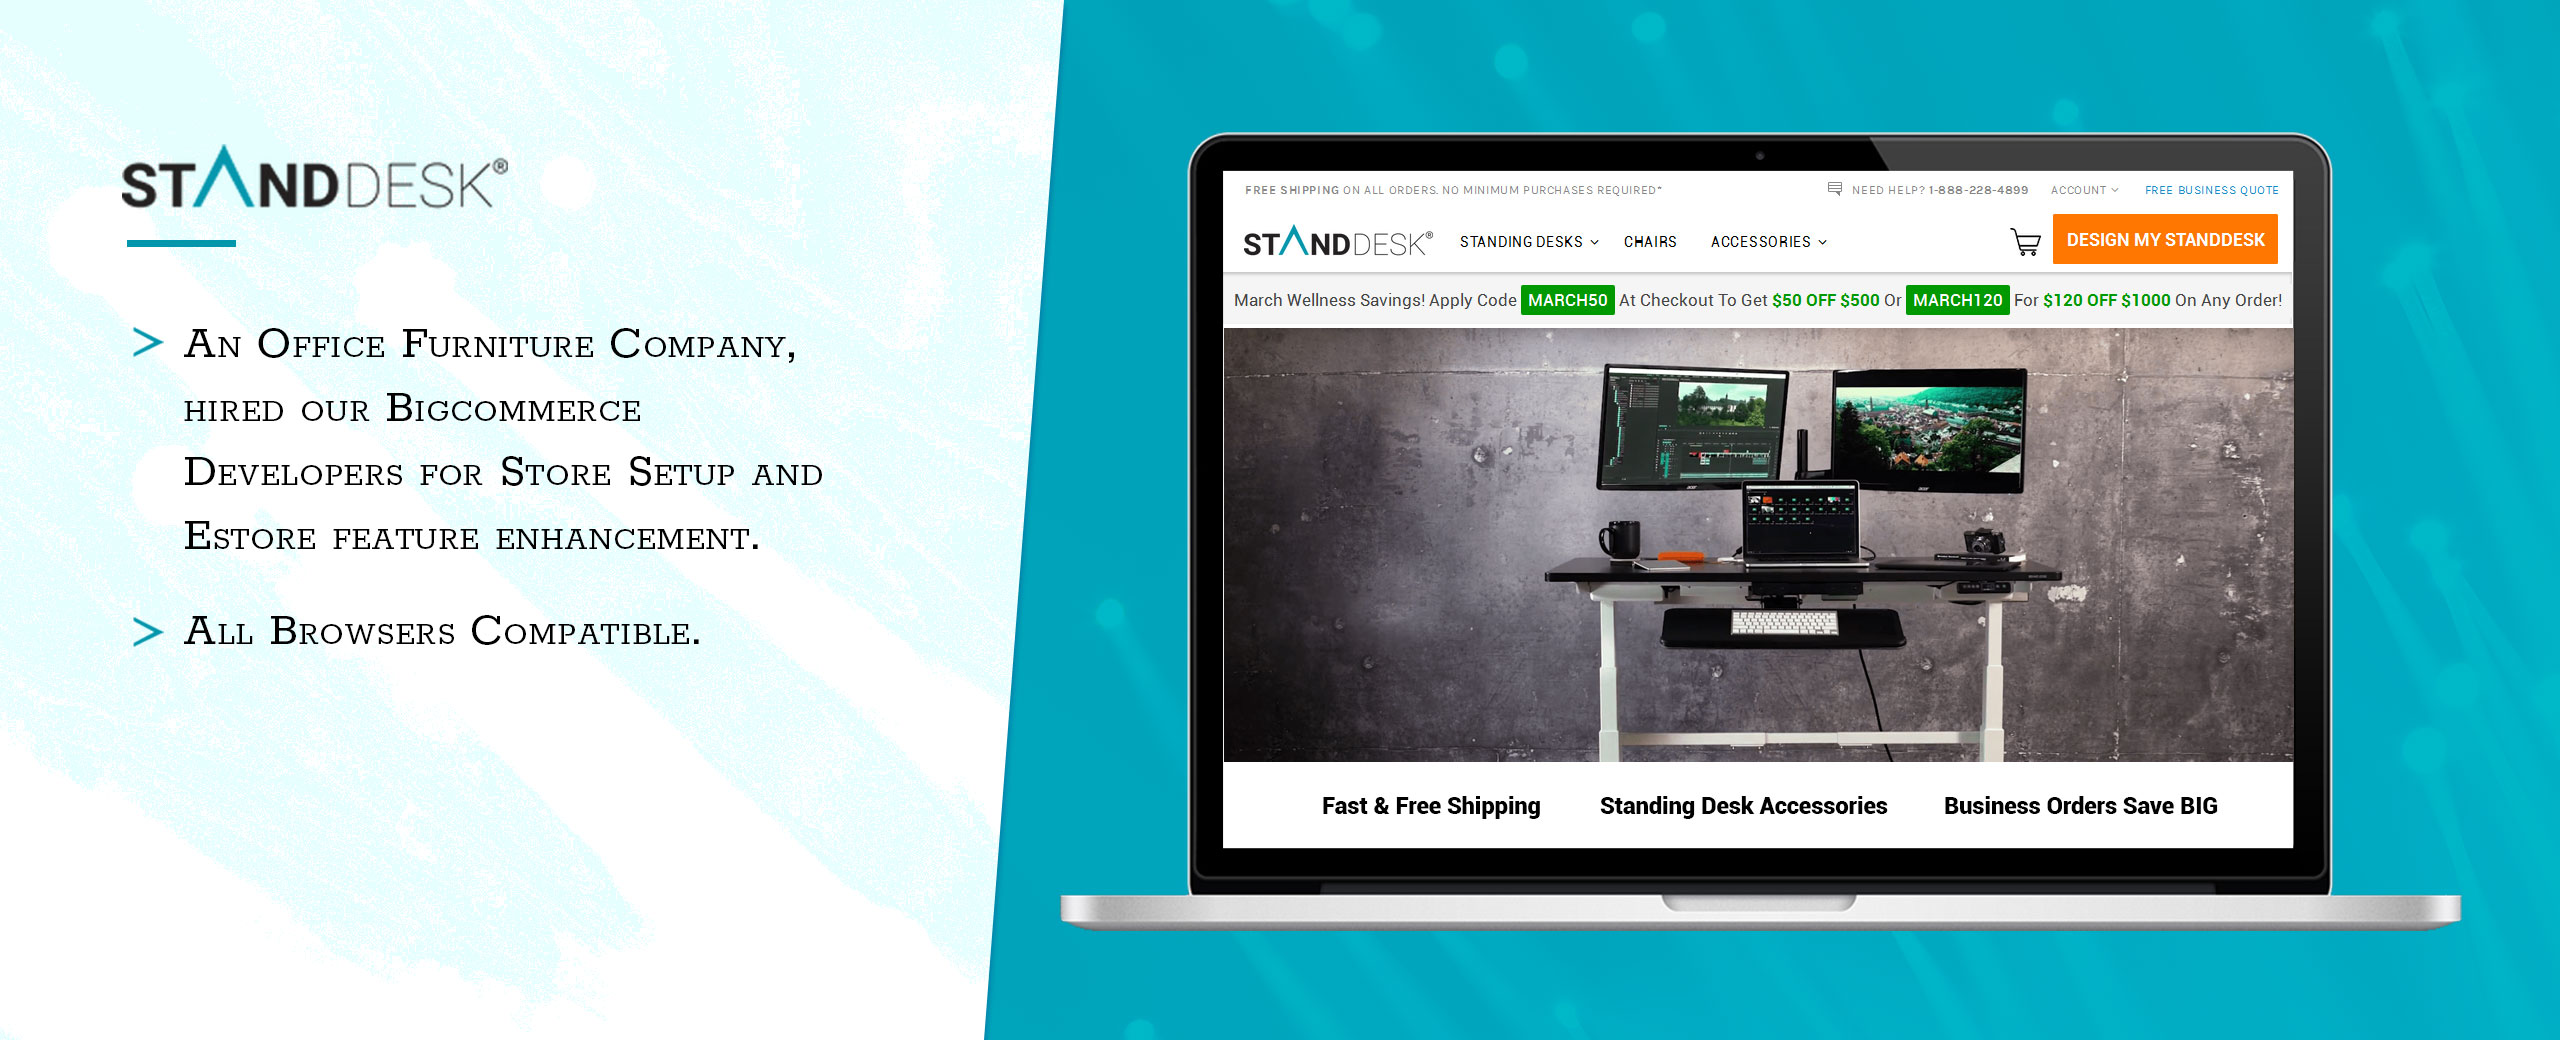 StandDesk opted for our Bigcommerce integrations services to enhance default functionality of their web store.